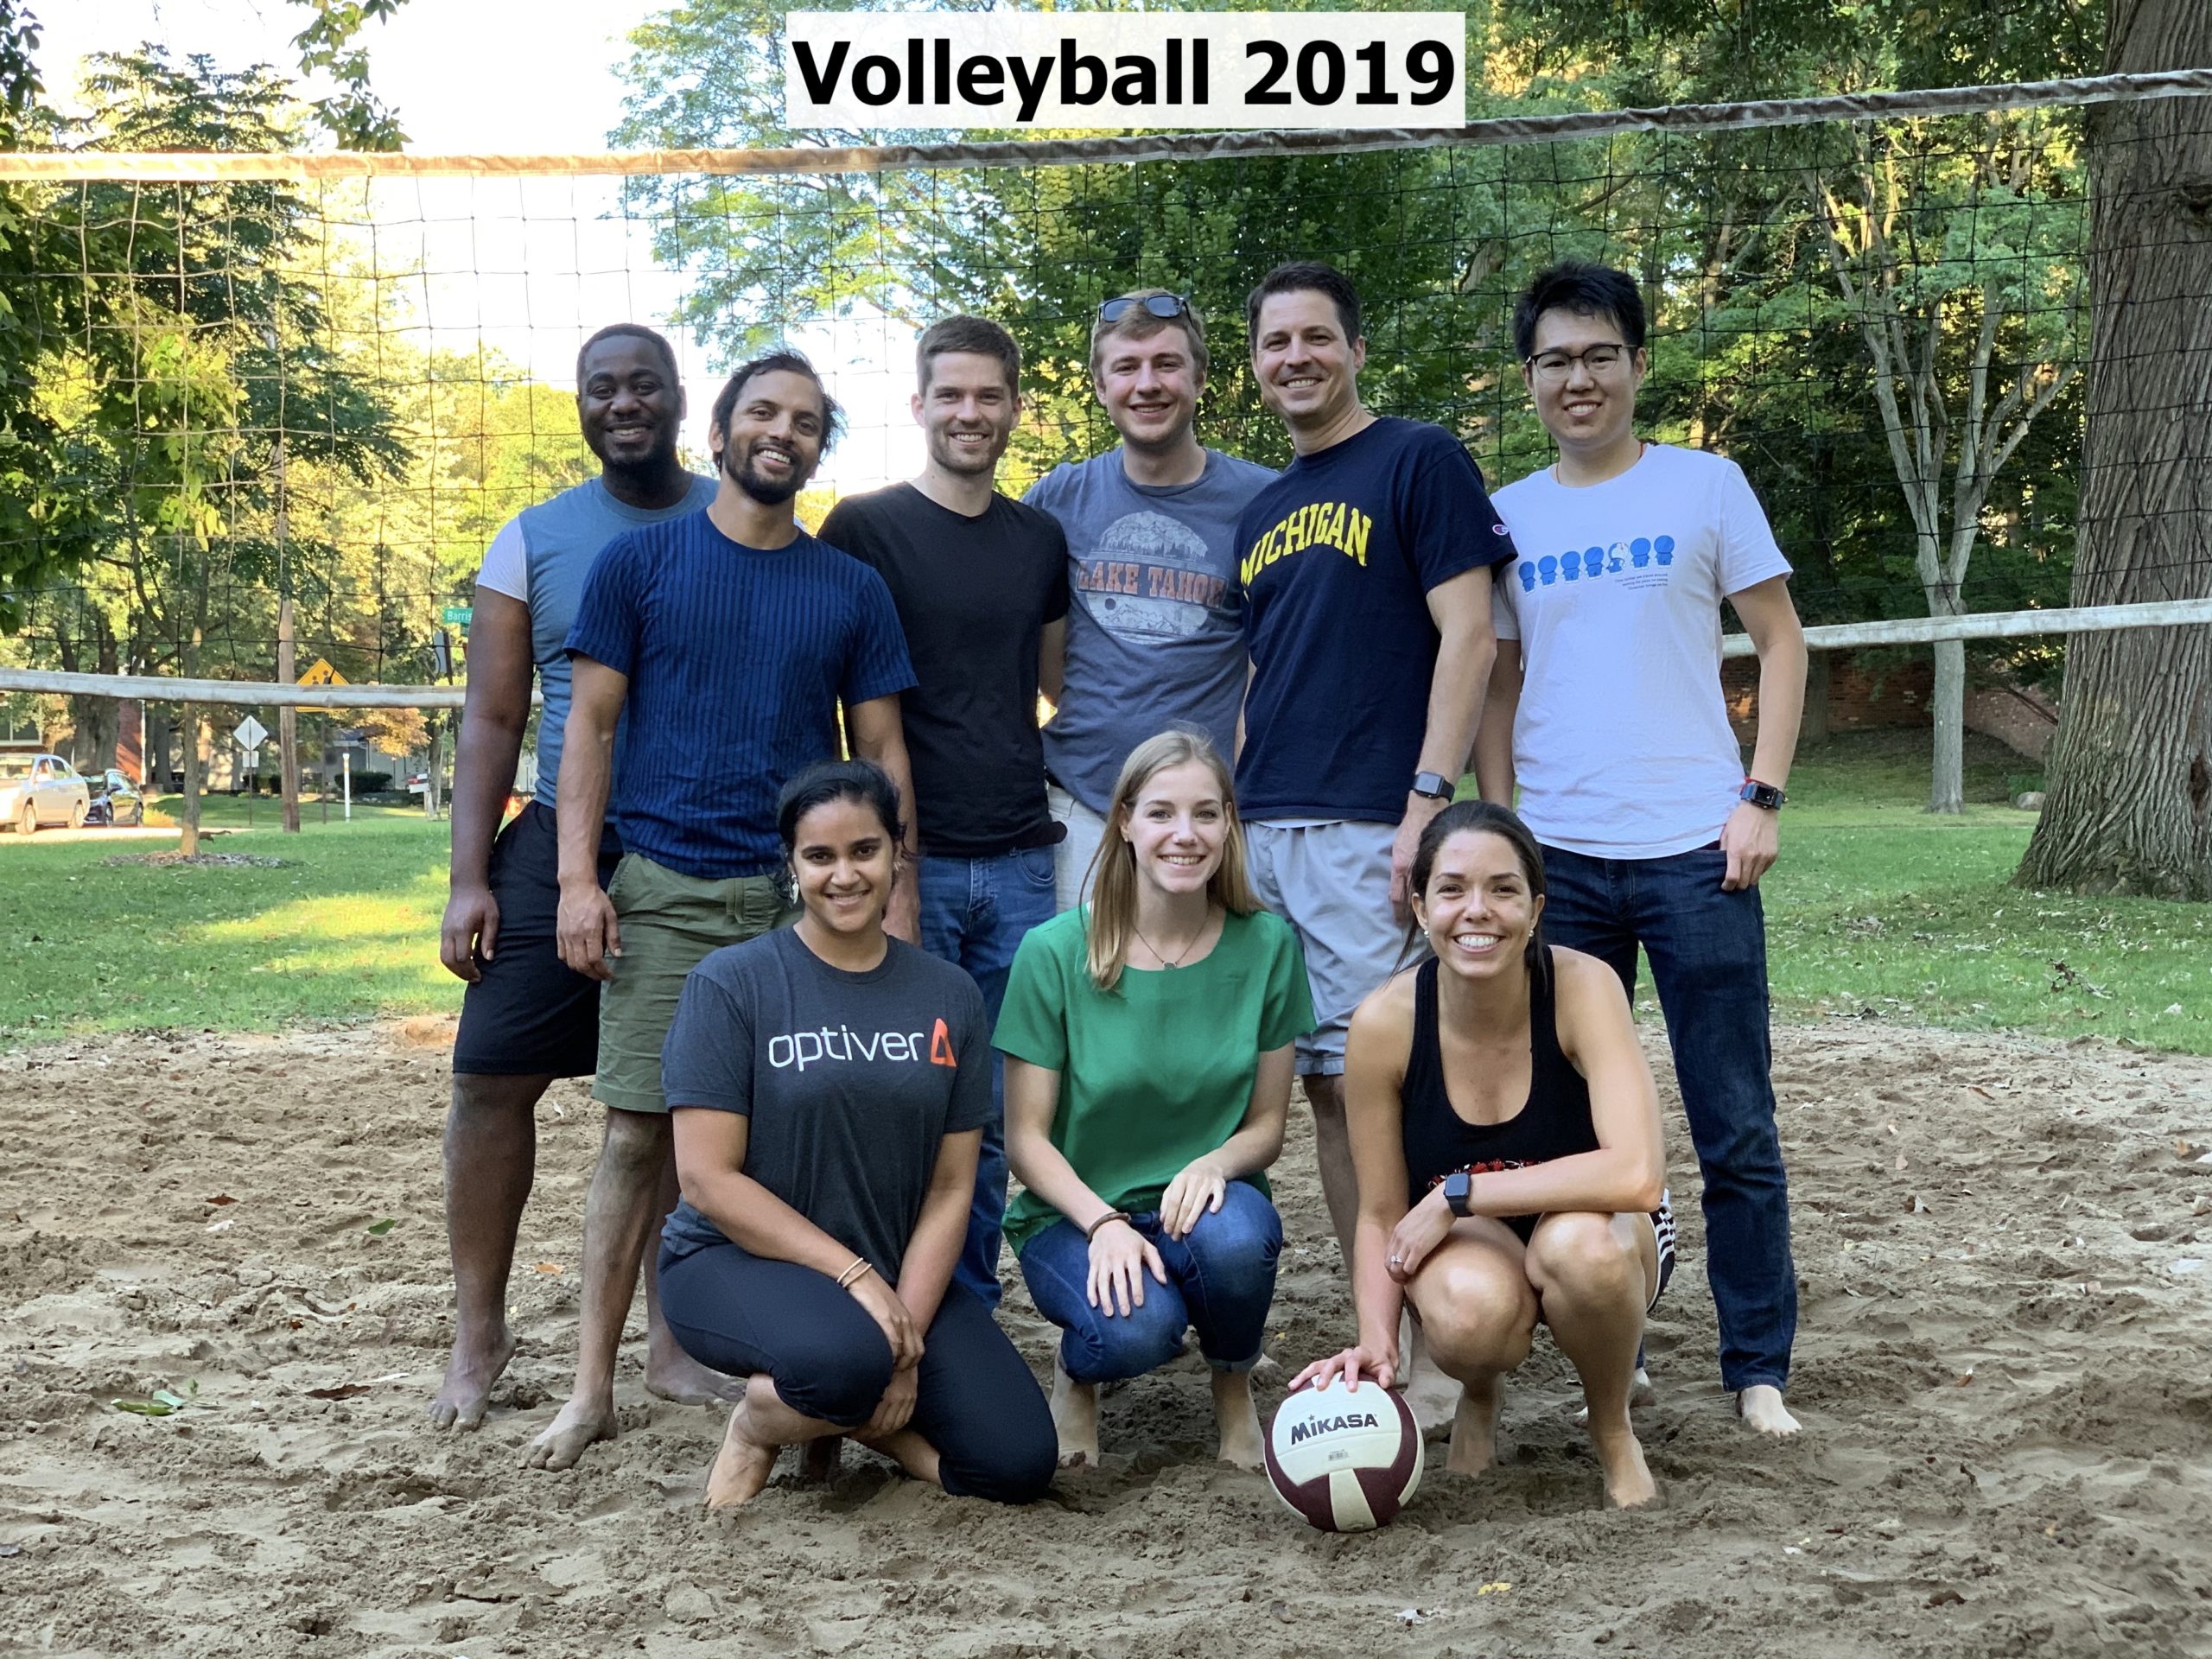 Lab group volleyall 2019